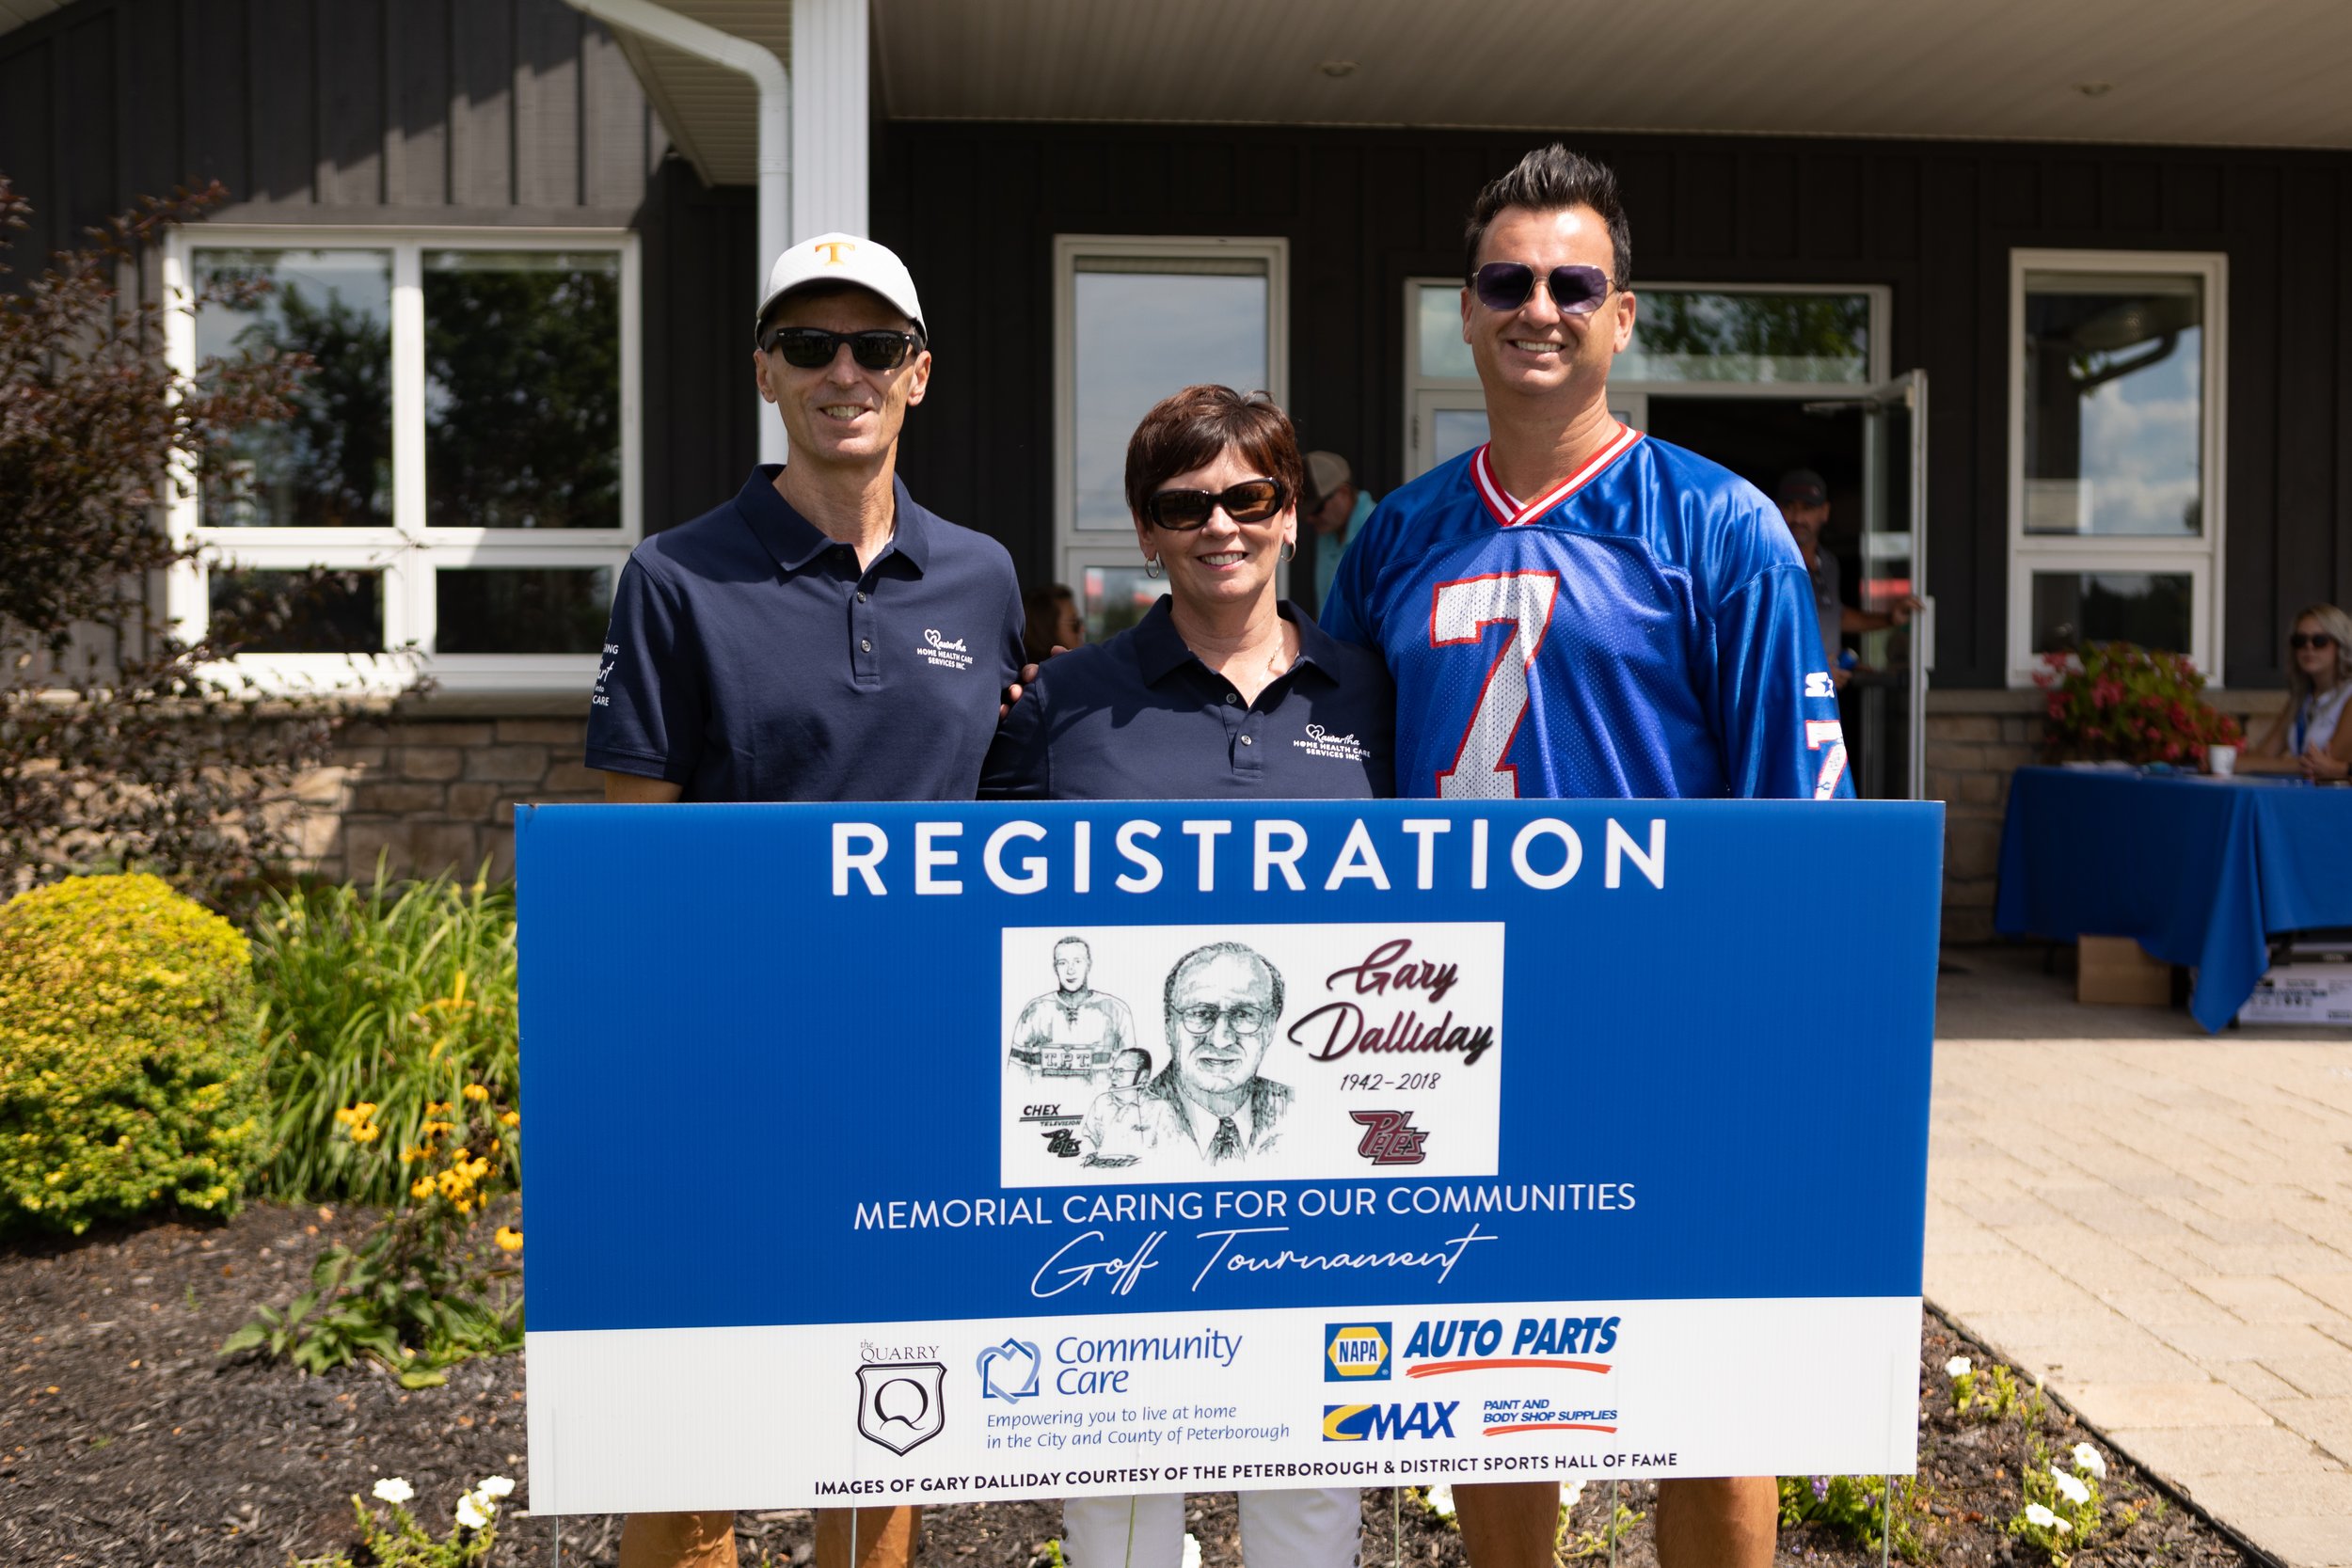  Tim (left), Krista (middle) and Pete Dalliday (right) were in the tournament’s attendance to help honour their late father who passed away on Aug. 10, 2018. All photos by Jordan Cooper. 